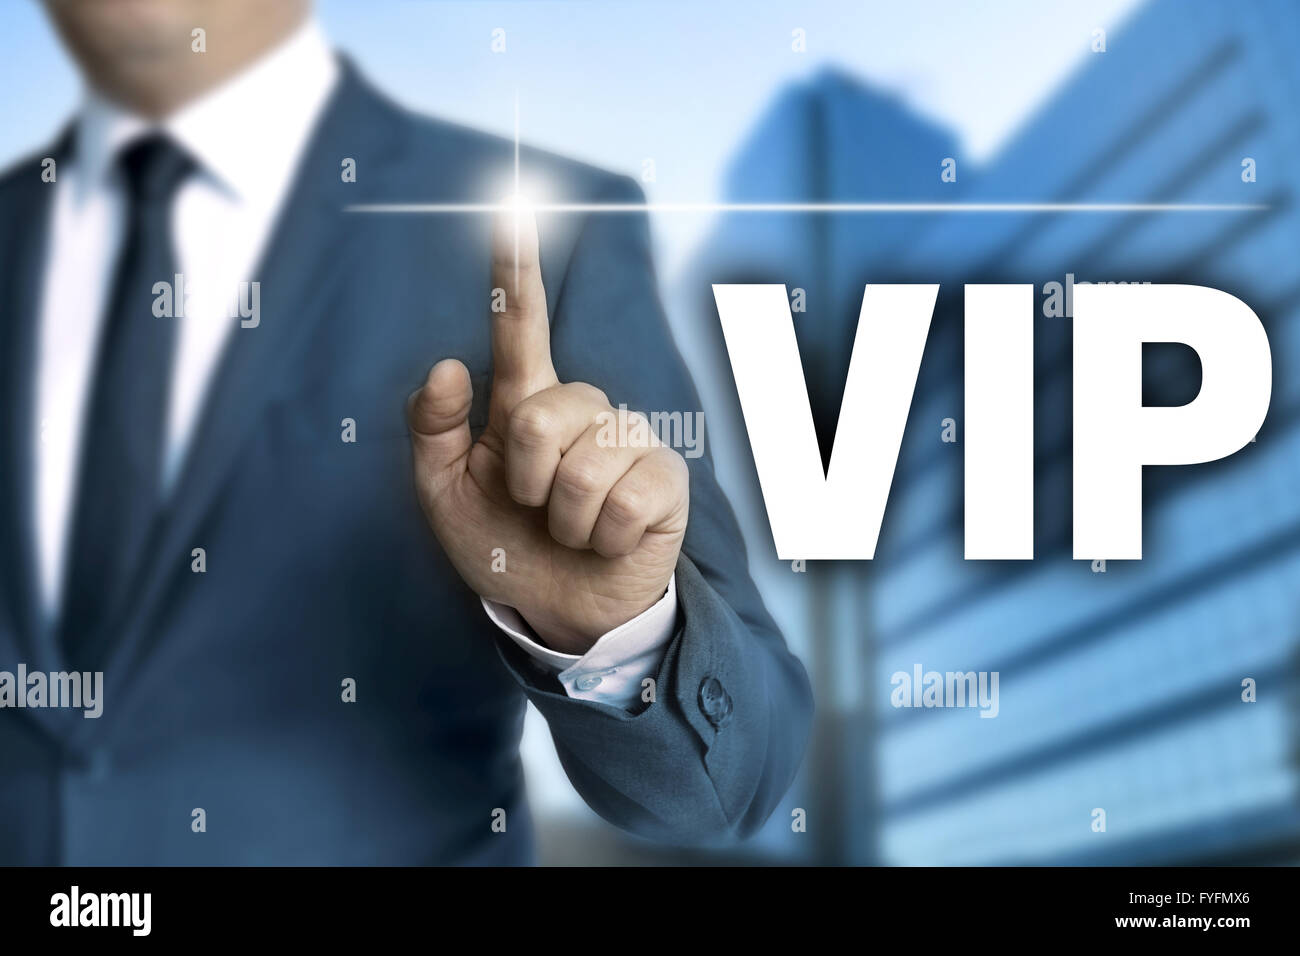 vip touchscreen is operated by businessman. Stock Photo